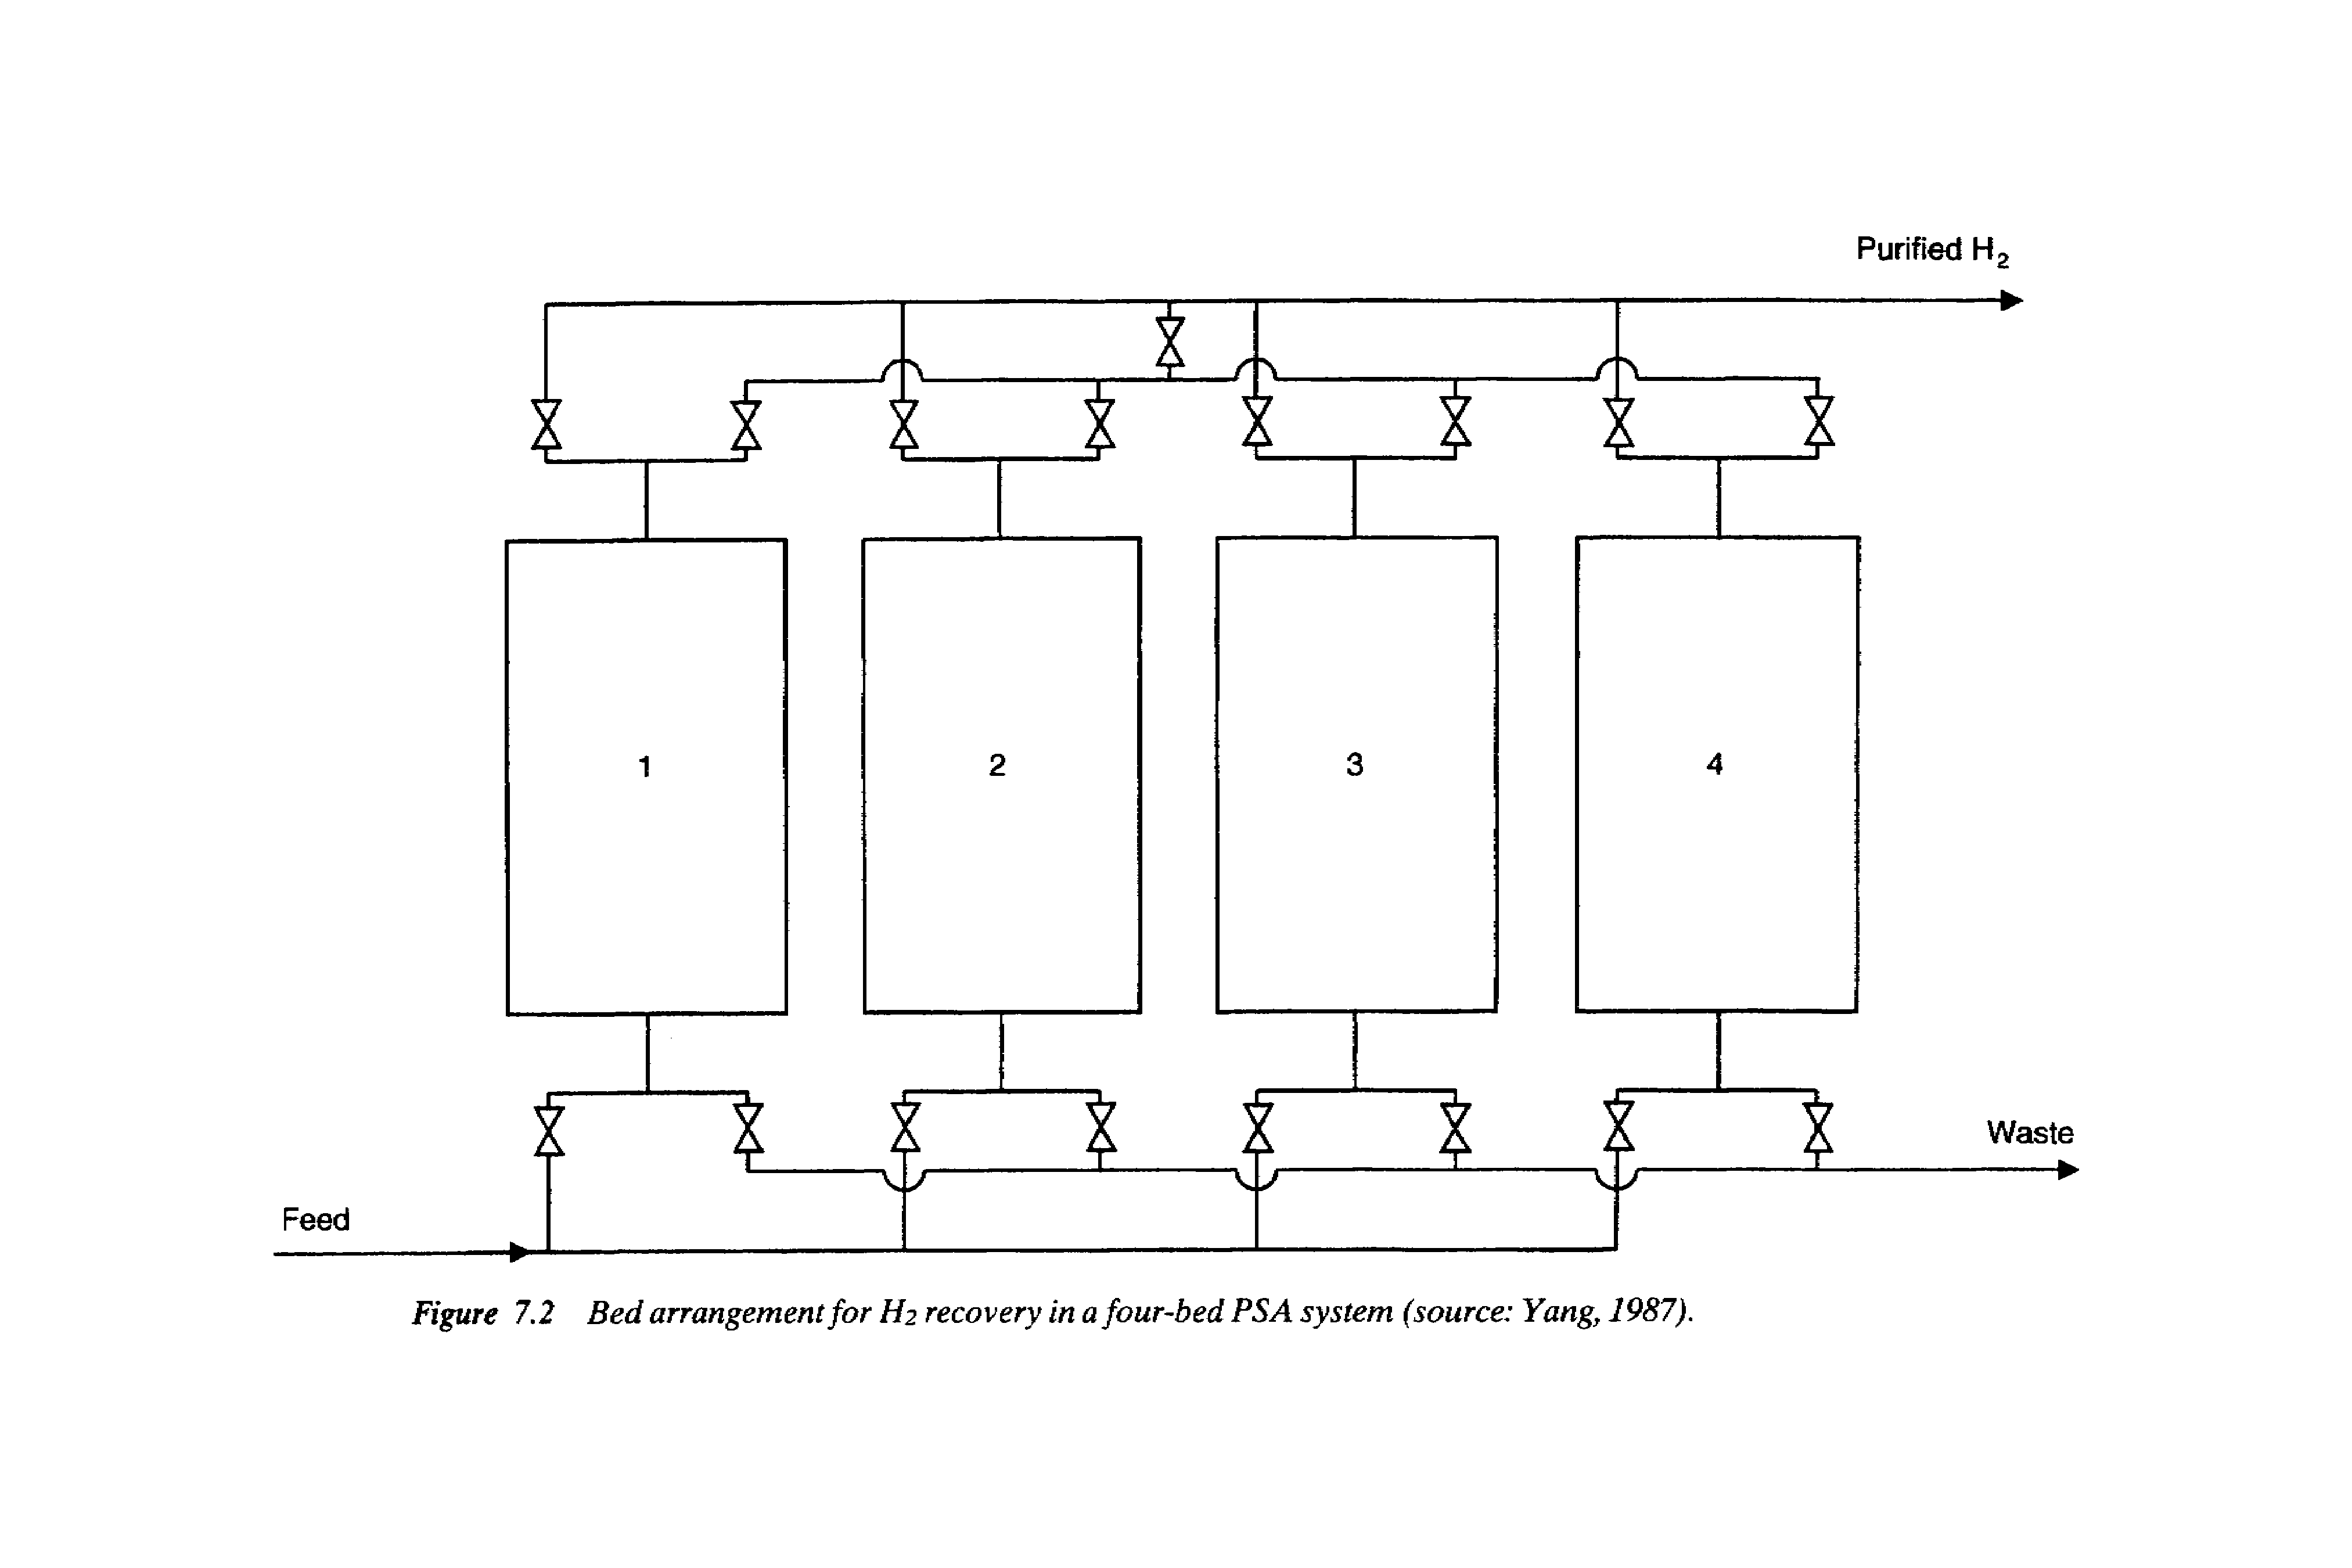 Figure 7.2 Bed arrangement for H2 recovery in a four-bed PSA system (source Yang, 1987).